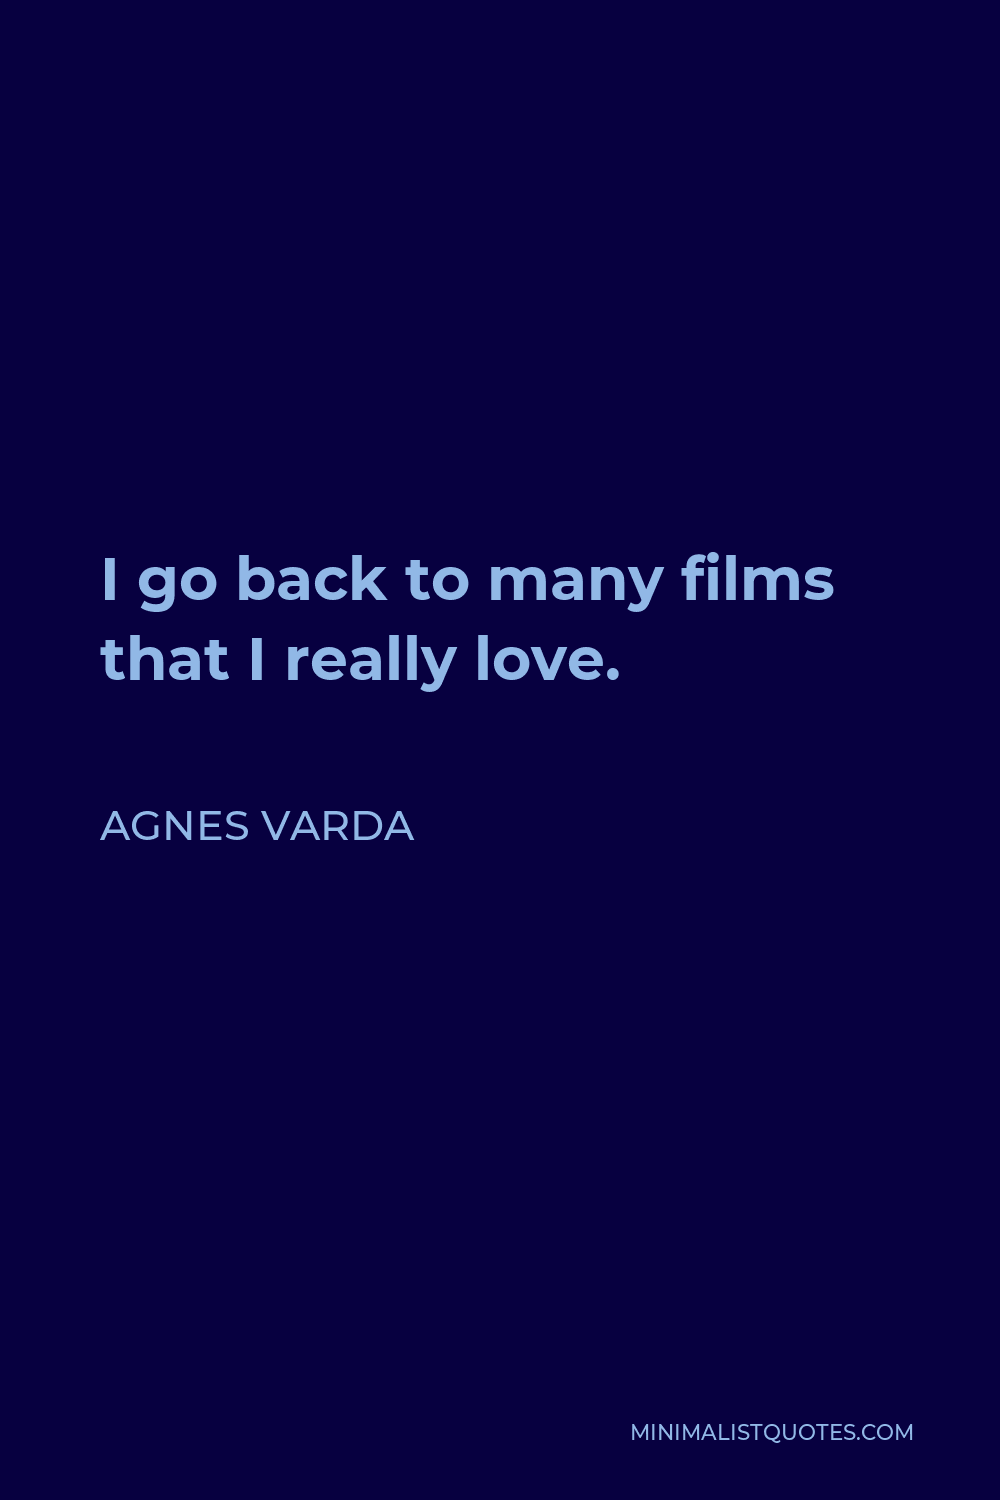 Agnes Varda Quote - I go back to many films that I really love.